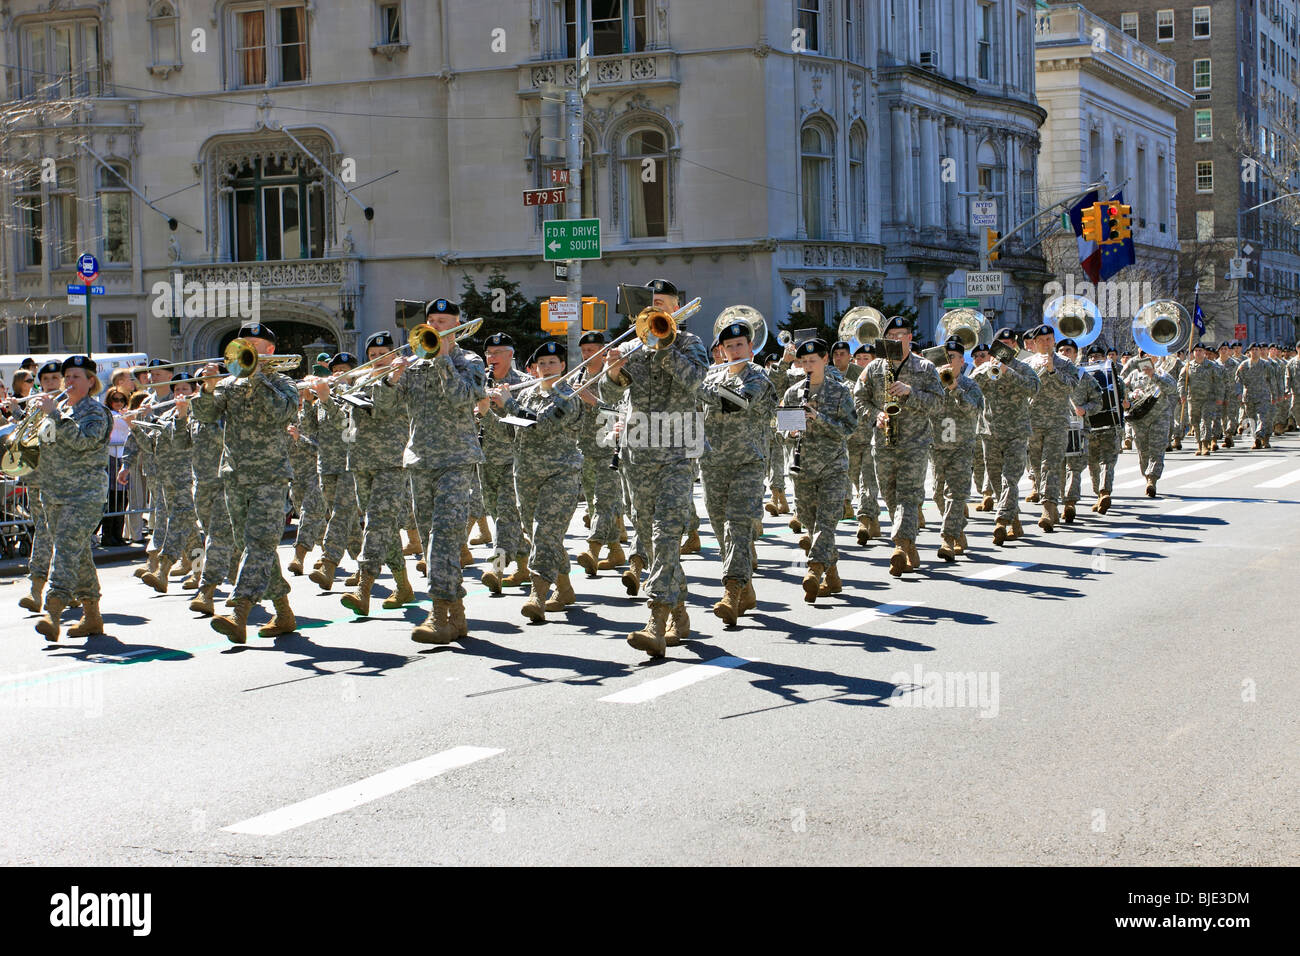 Military marching band marches up 5th Ave. in St. Patrick's Day parade, Manhattan, New York City Stock Photo